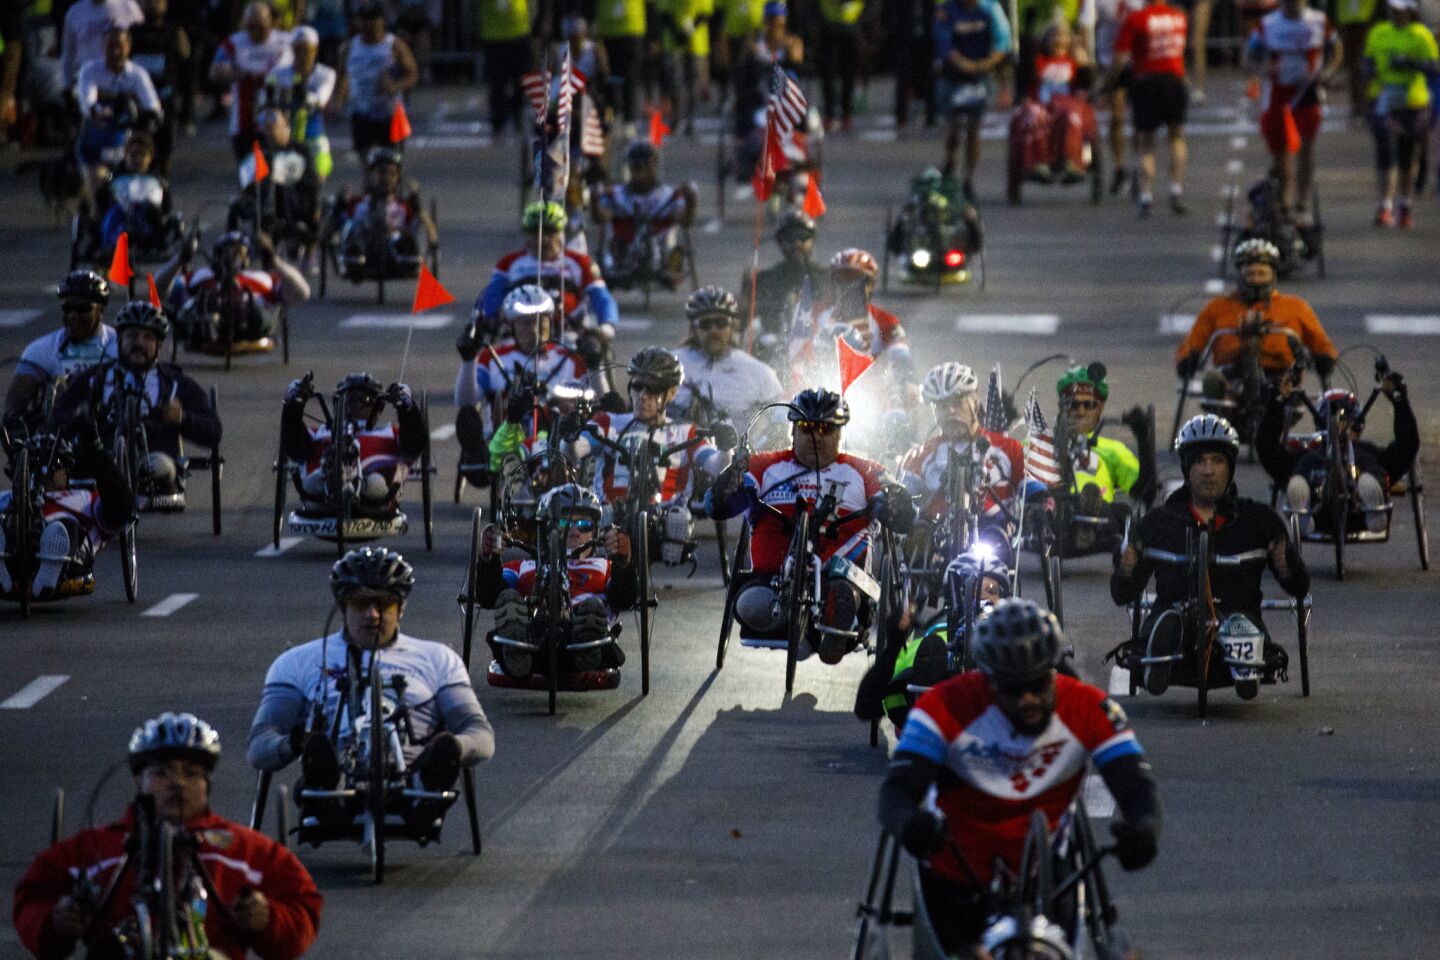 The hand-cycle racers begin their portion of the L.A. Marathon at Dodger Stadium on March 18.